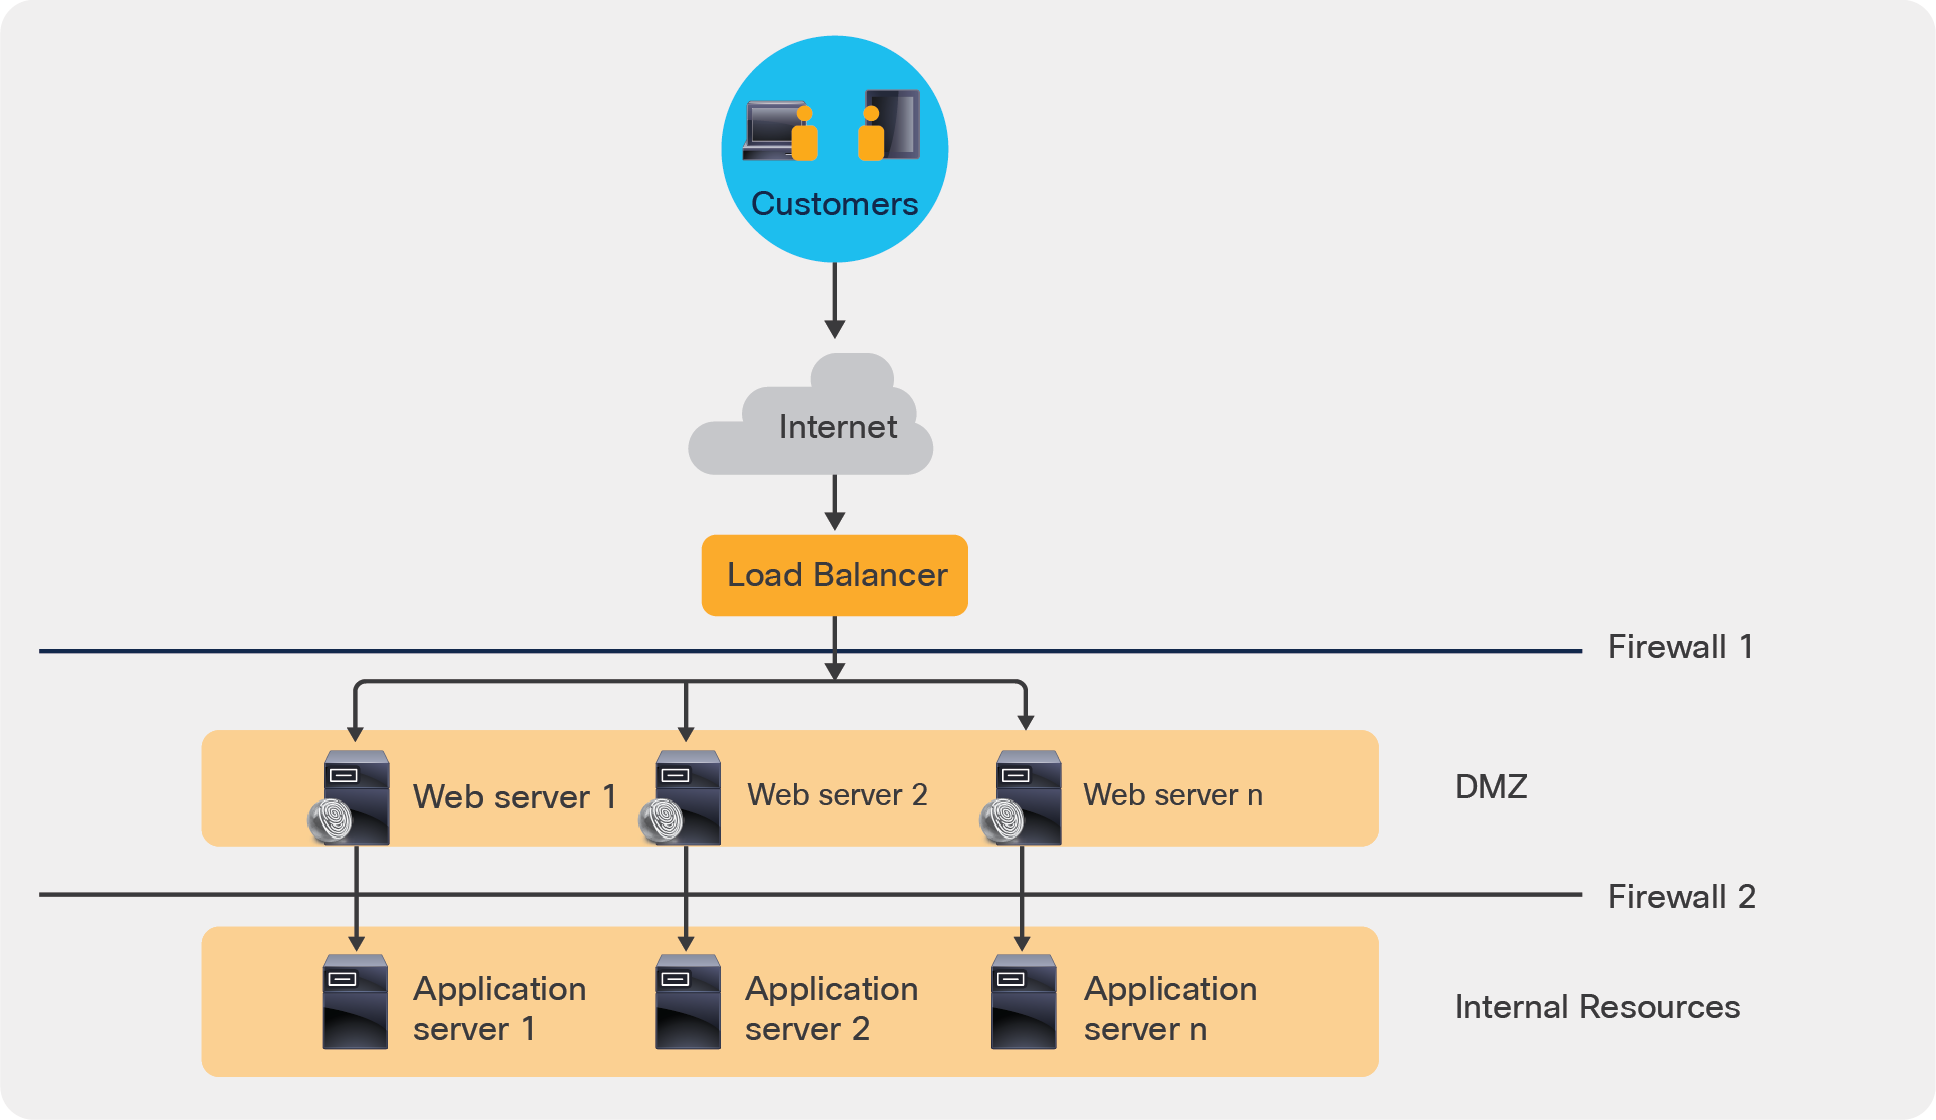 Using a DMZ to protect the data center